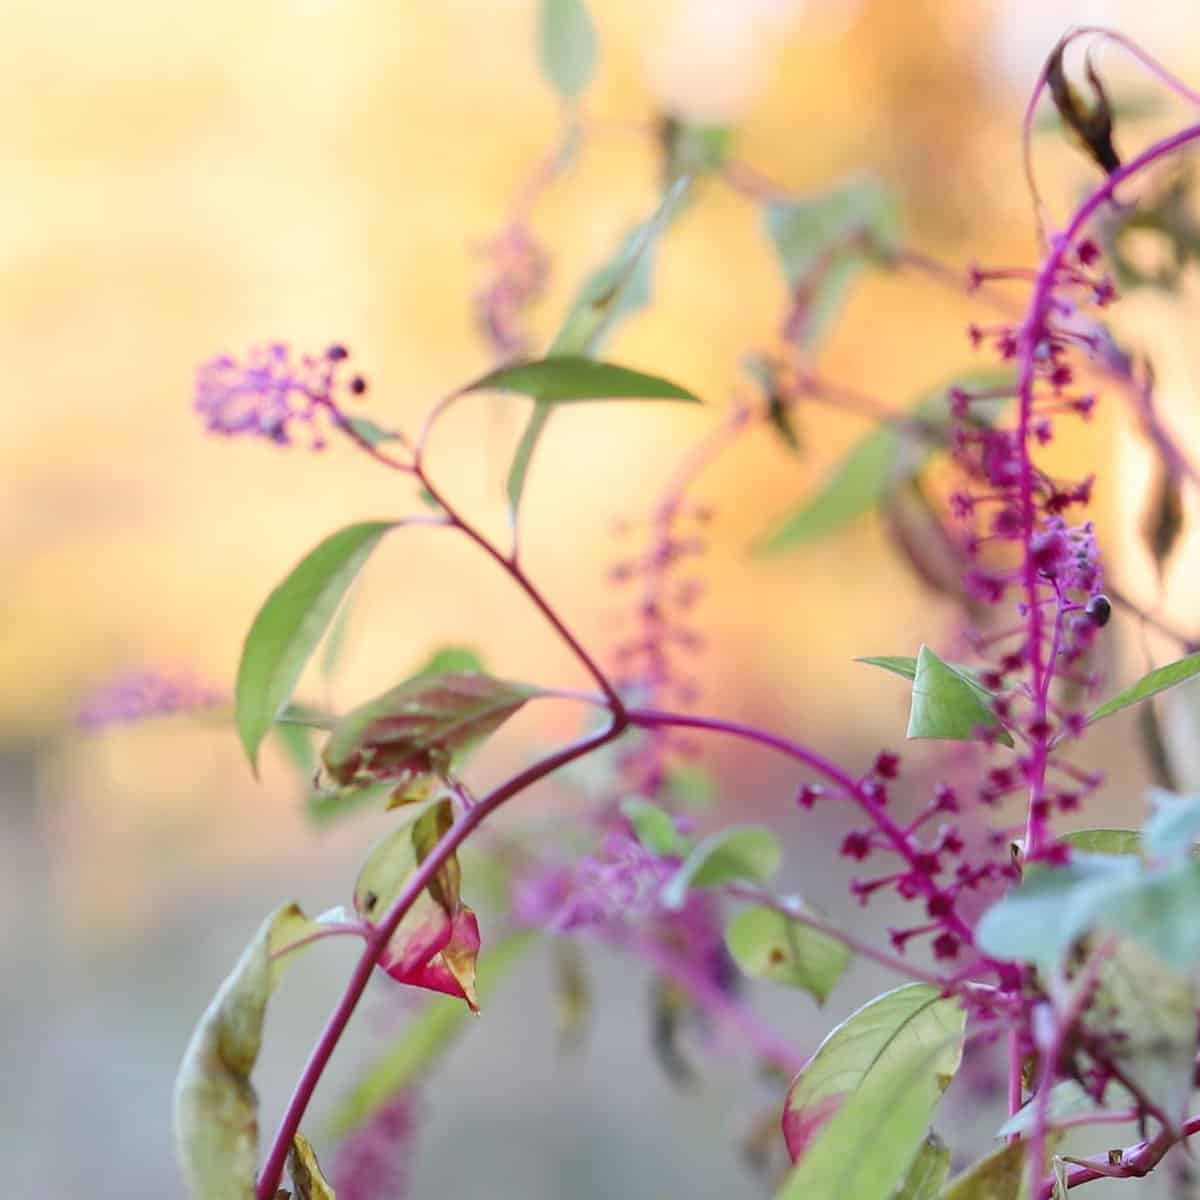 A close up of a plant with purple flowers.